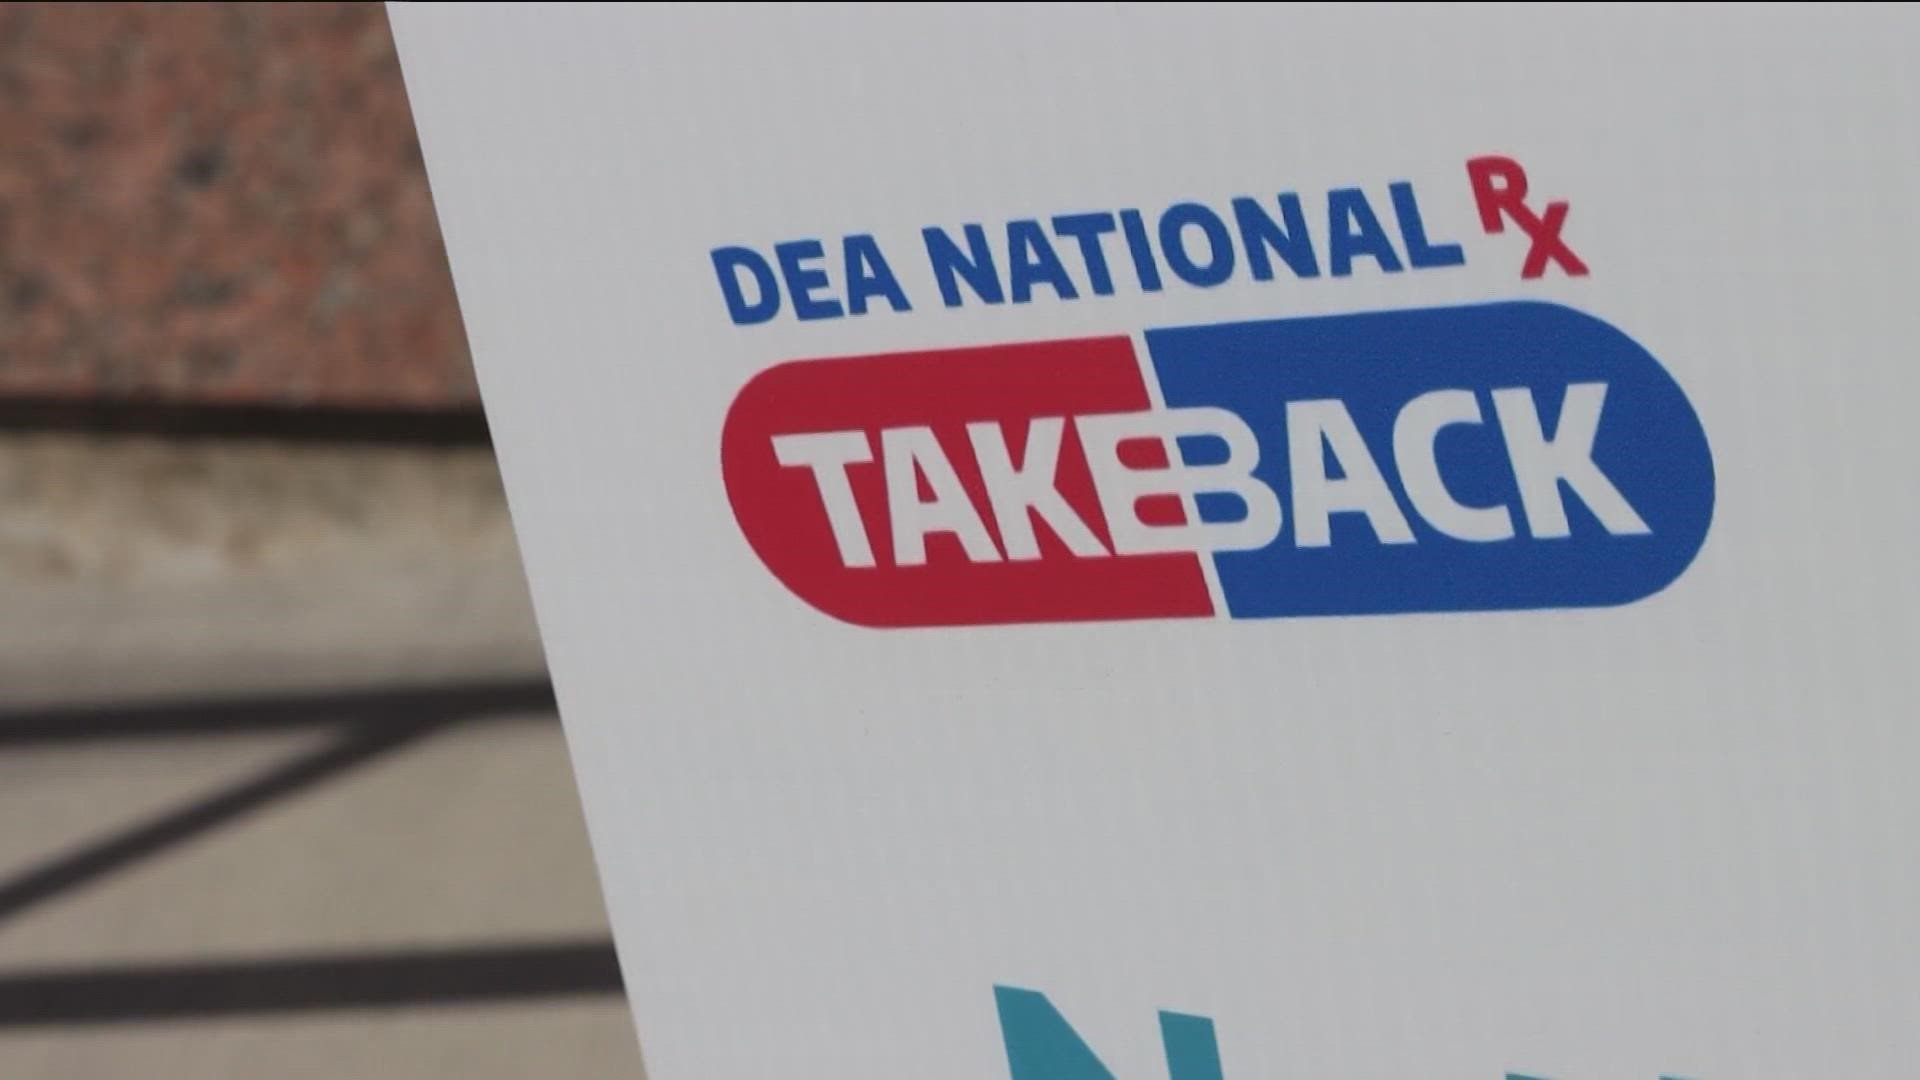 Central Texans were able to get rid of unwanted prescription drugs by dropping them off at designated places on Saturday.